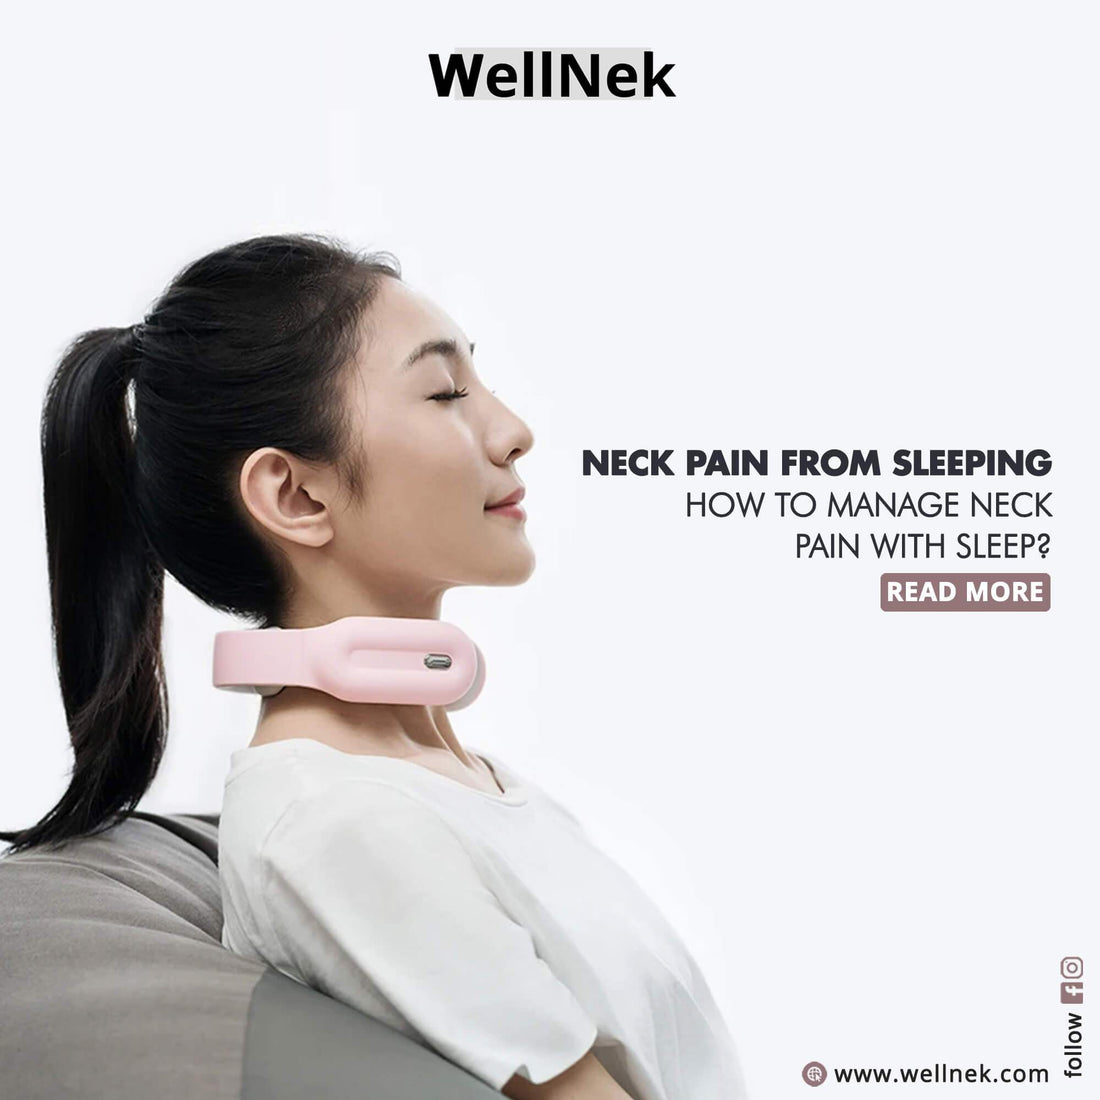 Neck Pain From Sleeping: How To Manage Neck Pain With Sleep? | Wellnek